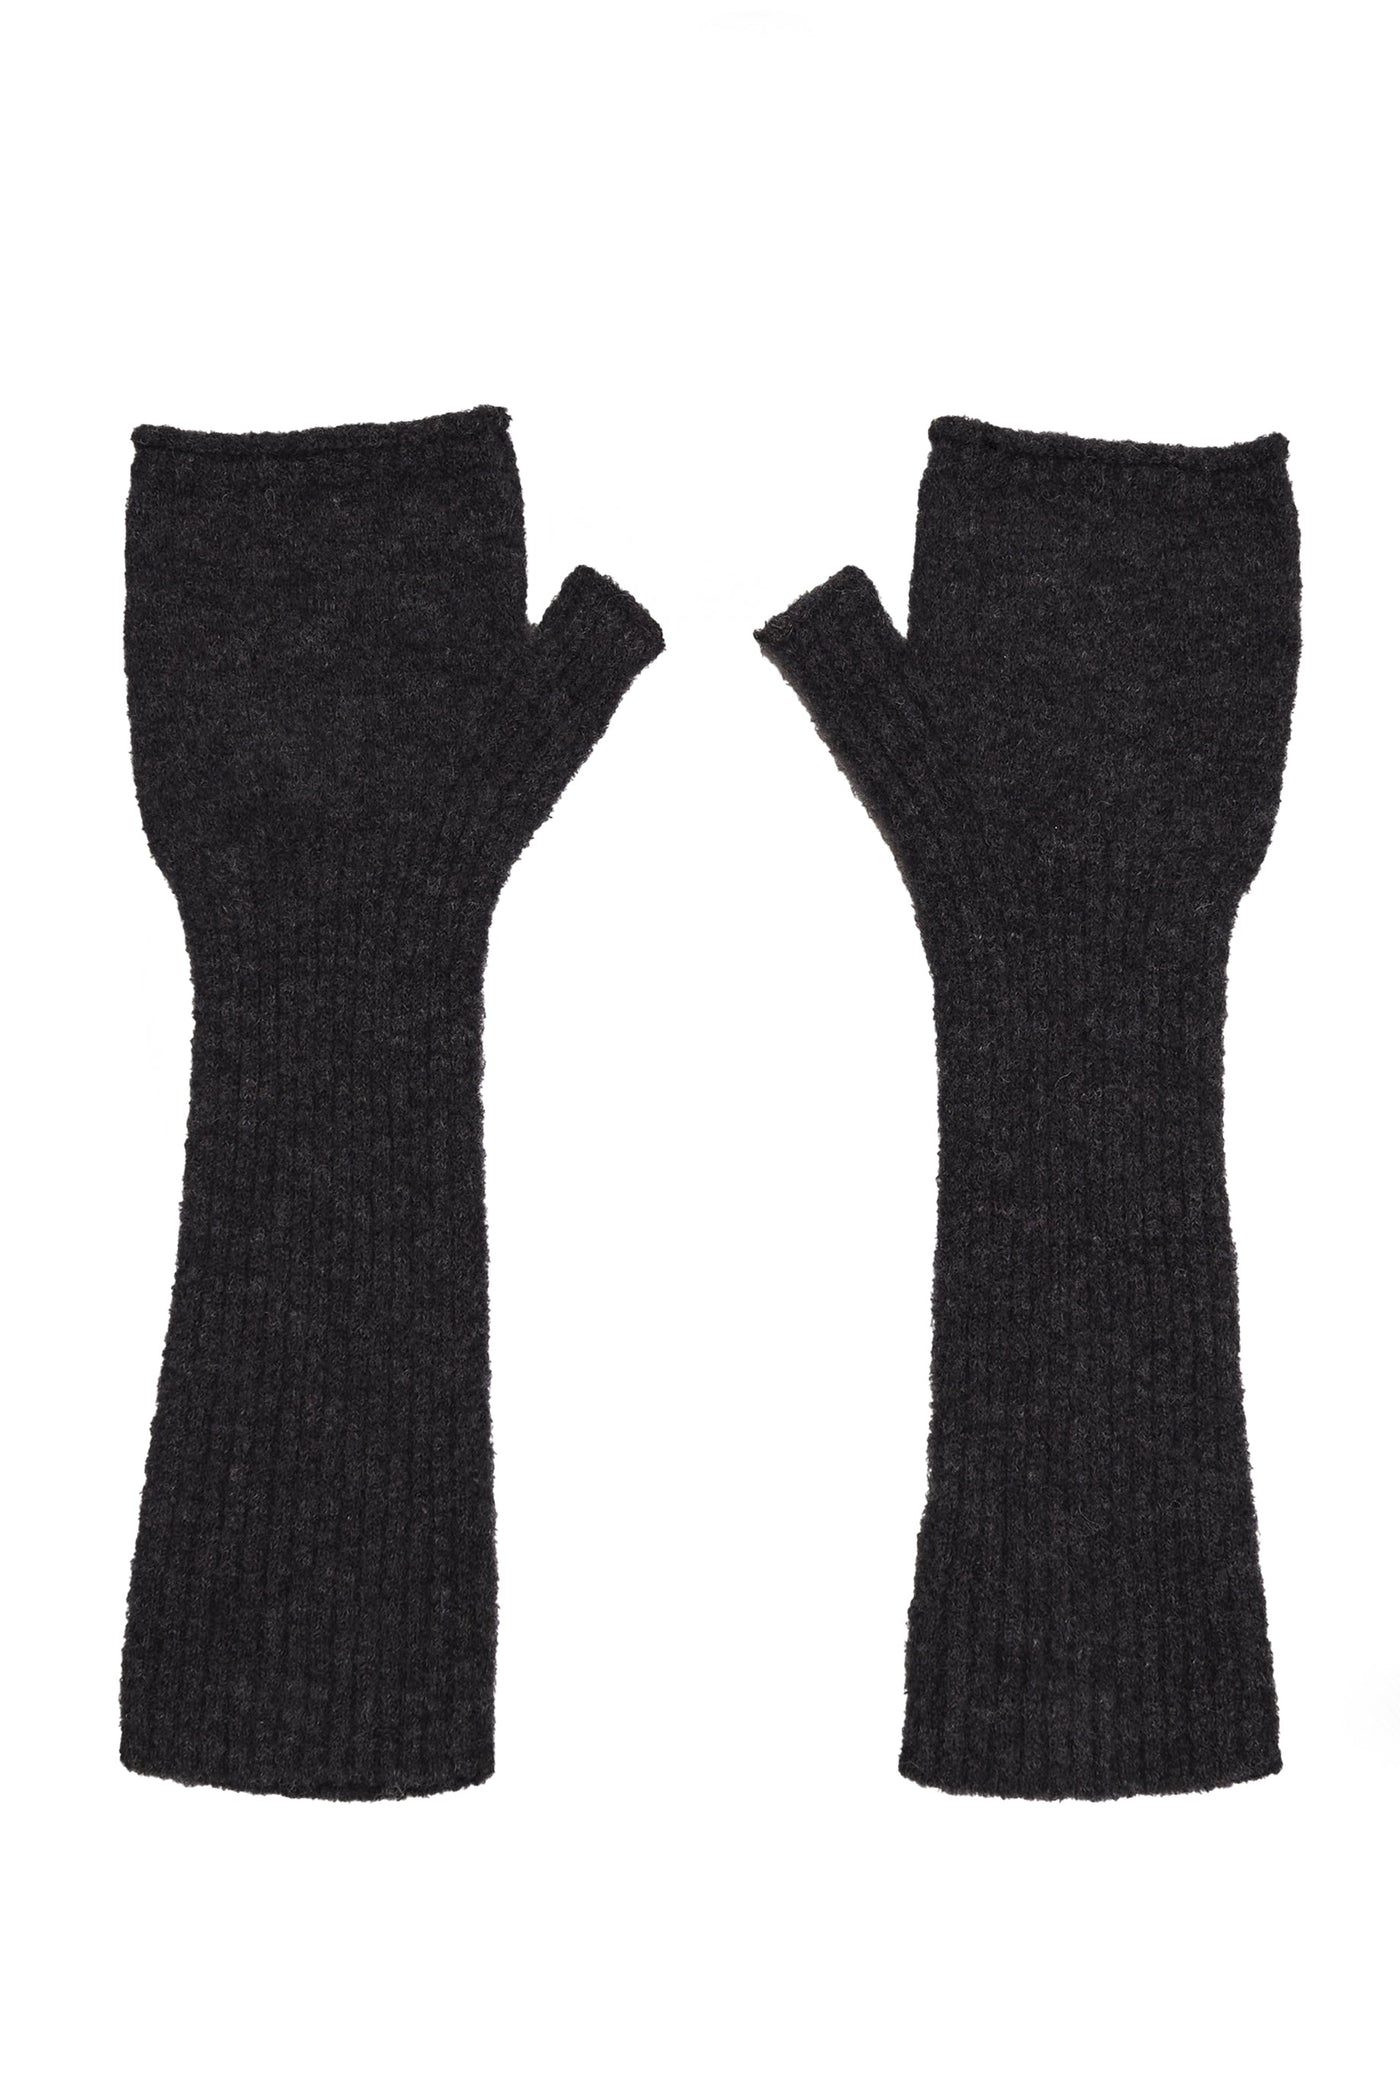 Transit Tall Gloves - Charcoal